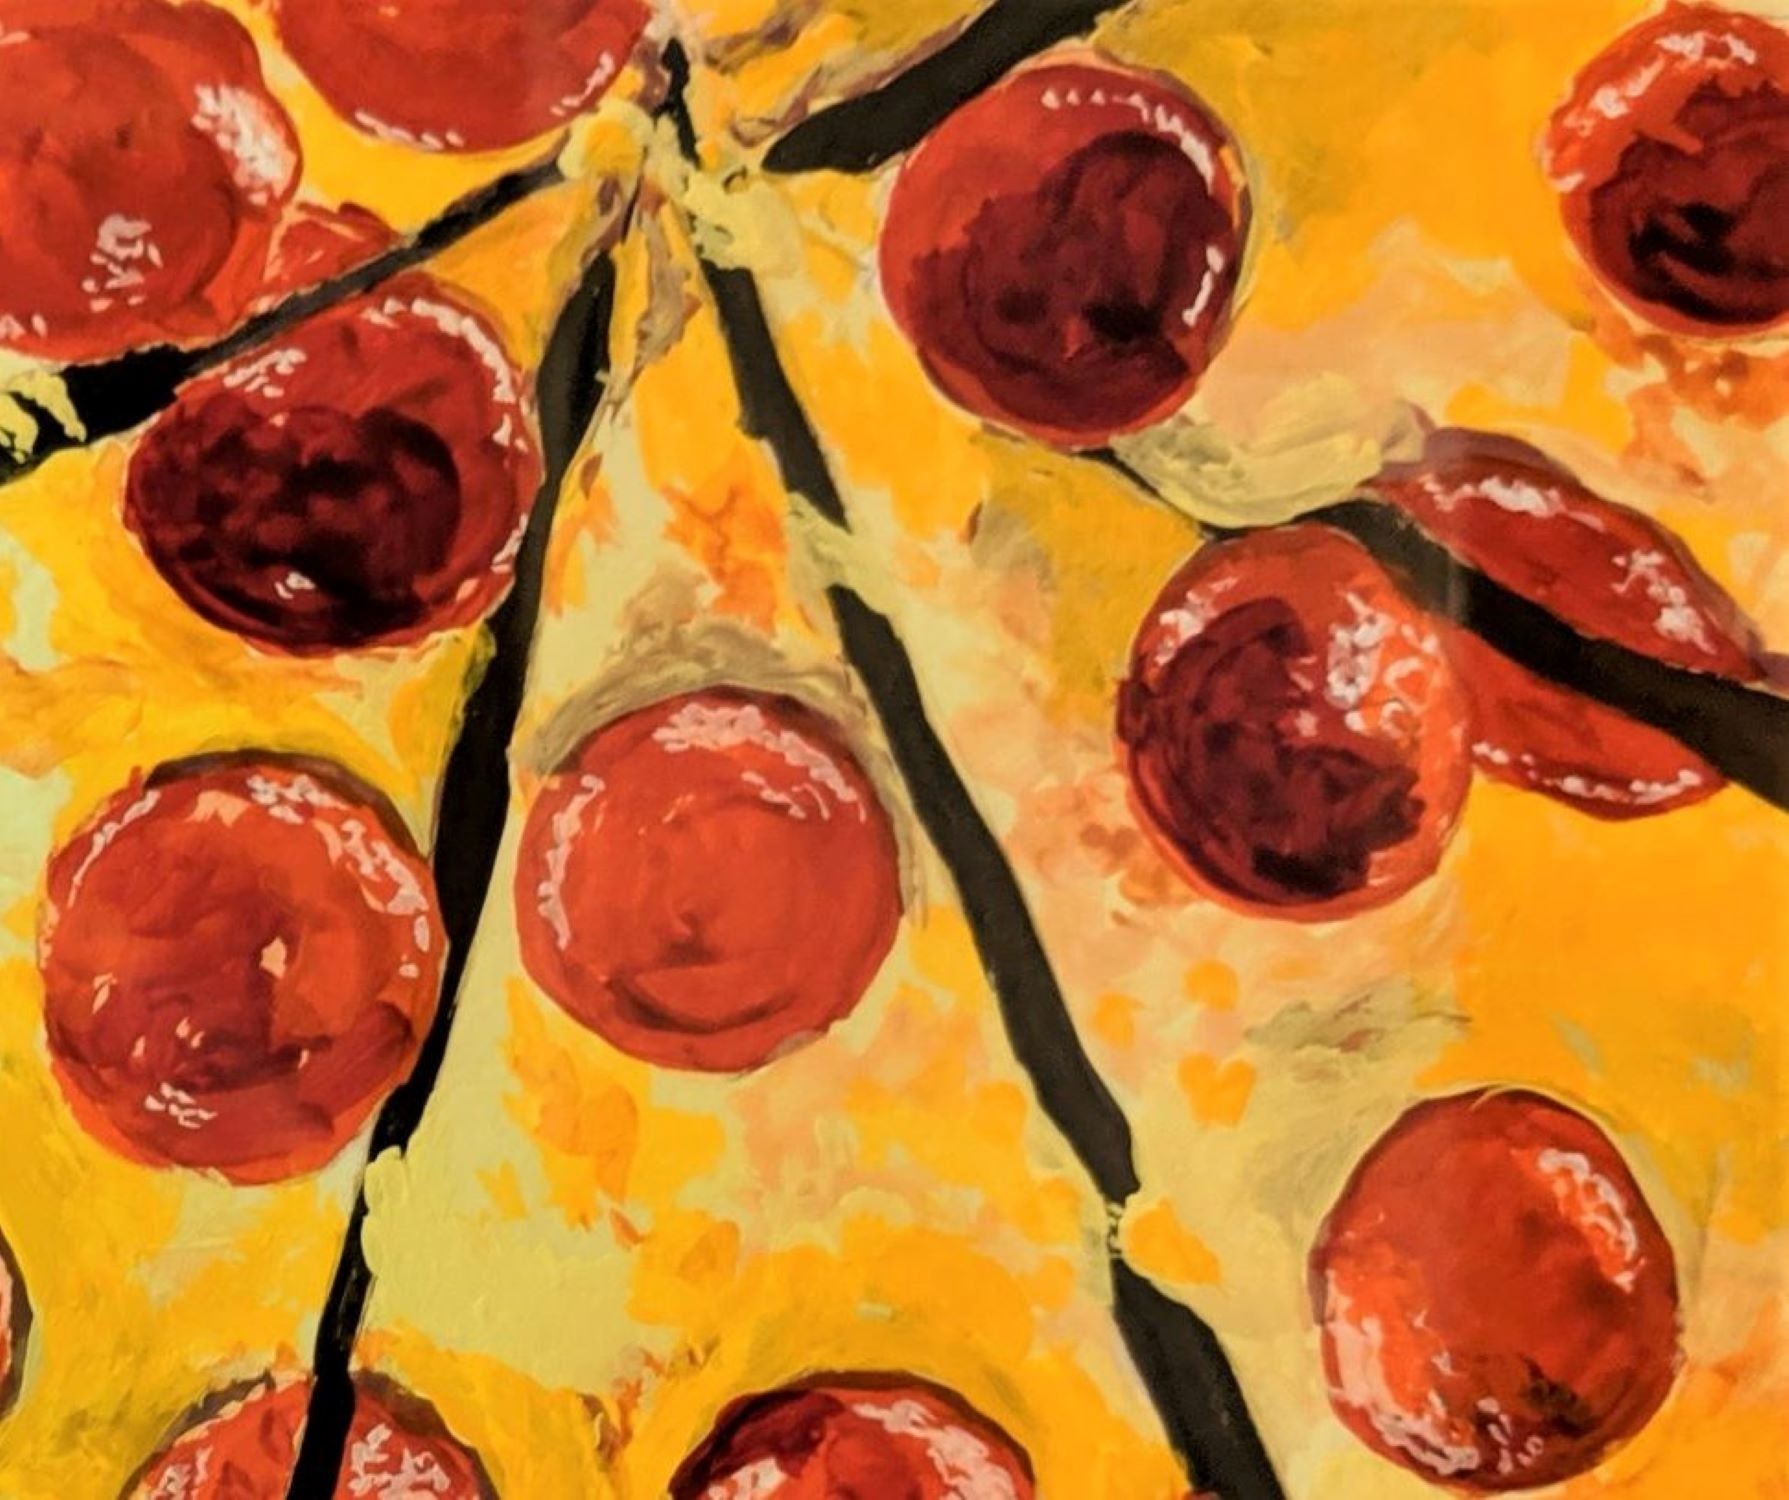 Pepperoni pizza painting detail